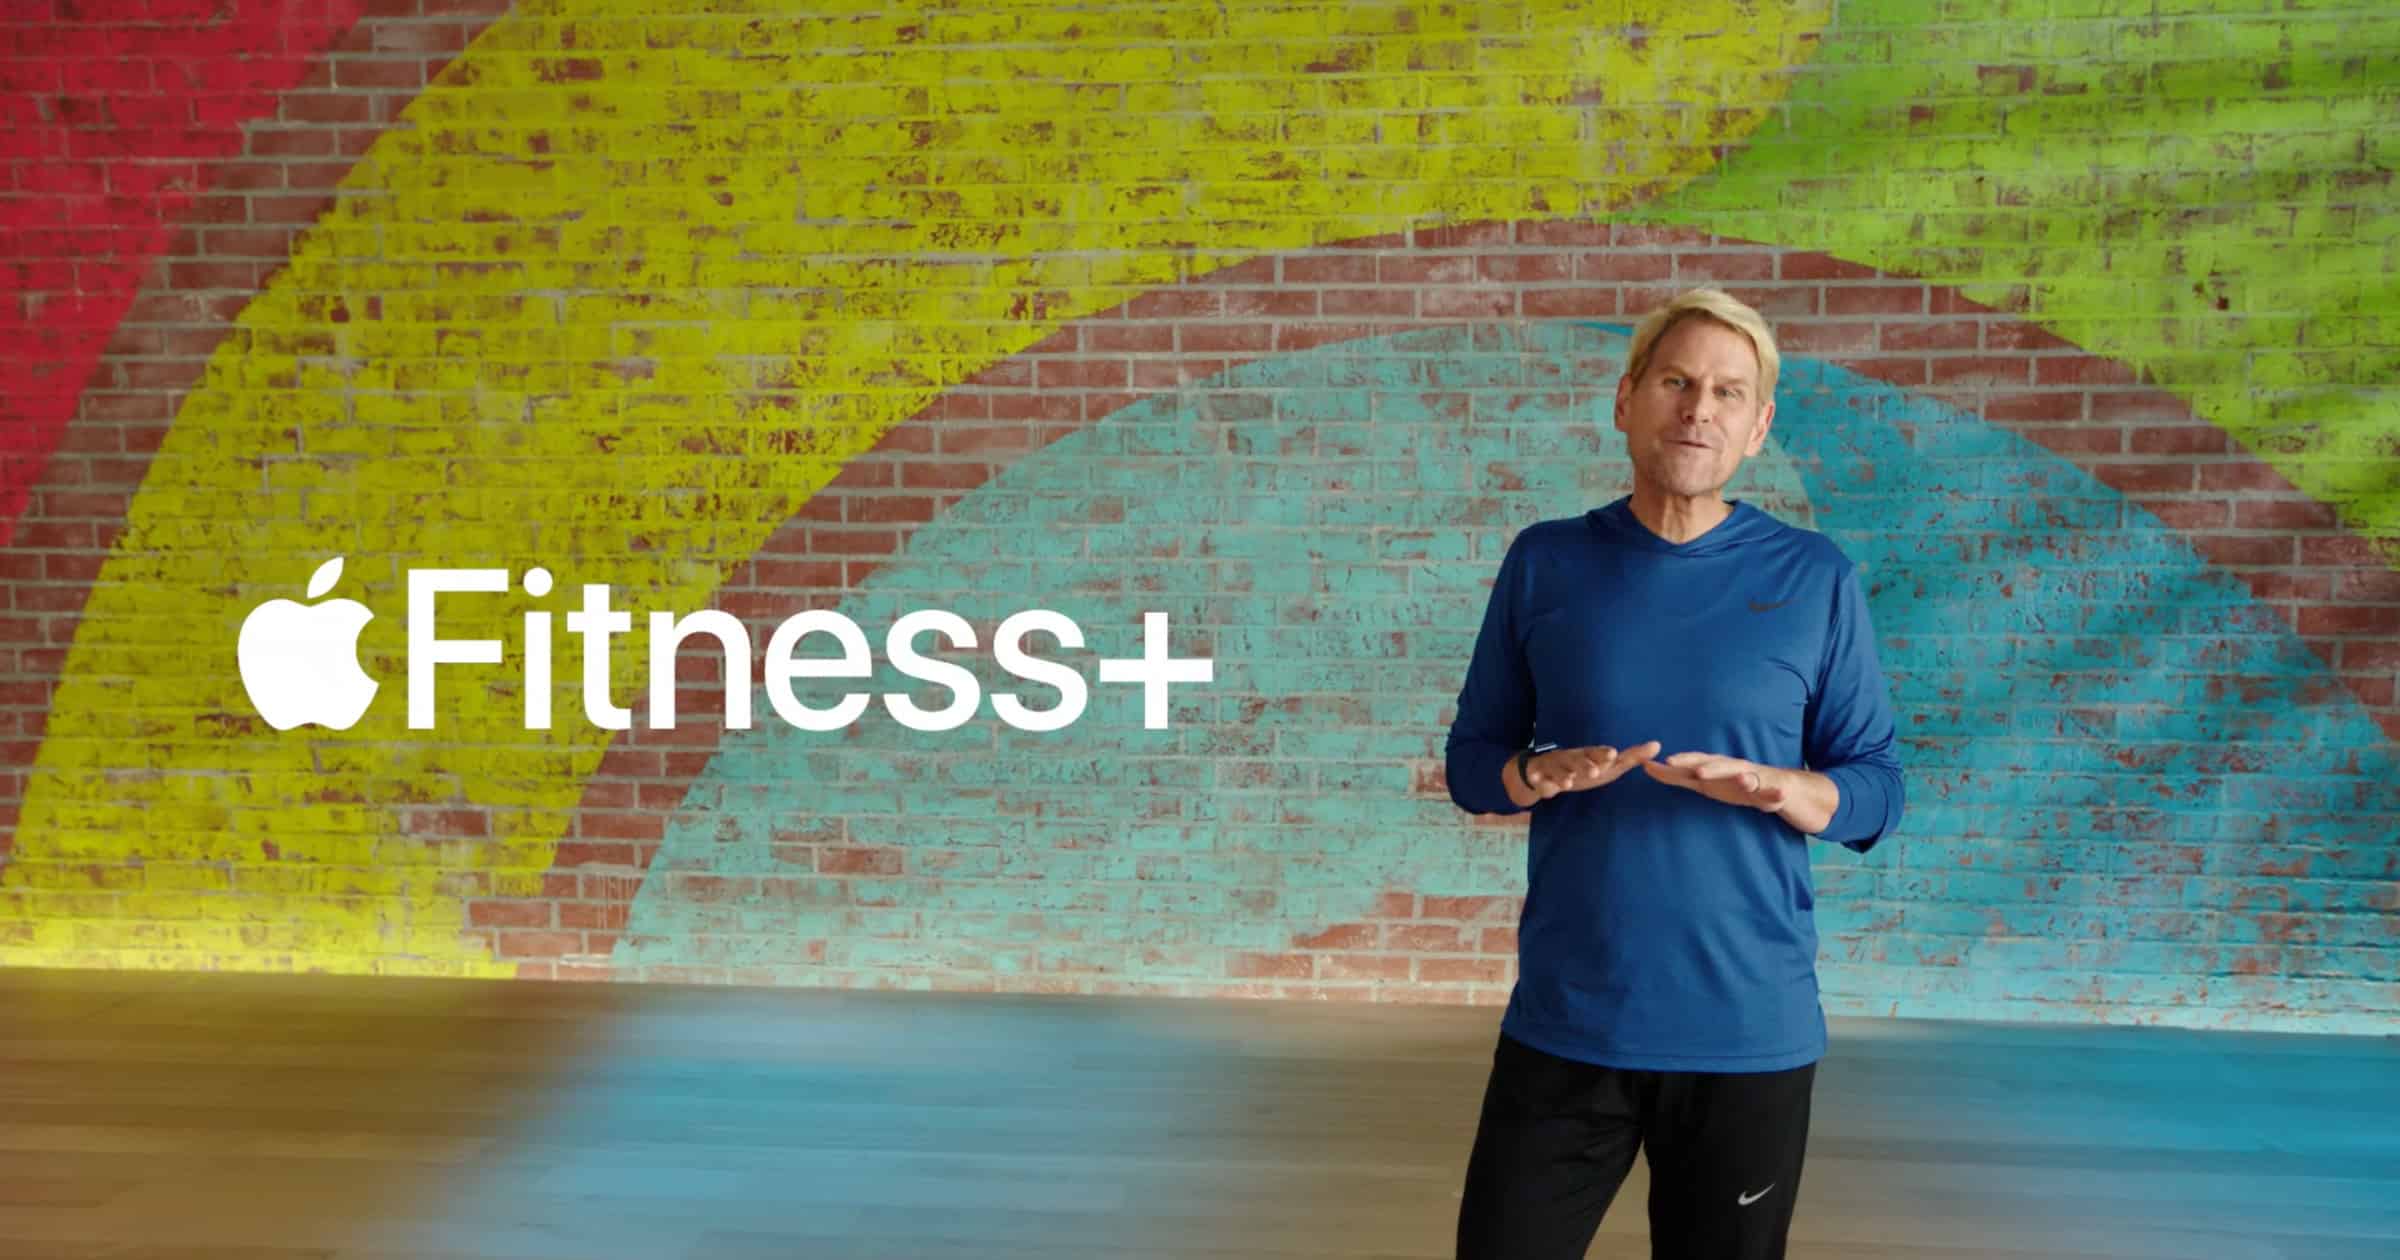 Apple Fitness+ Chief Hints at Content in More Languages